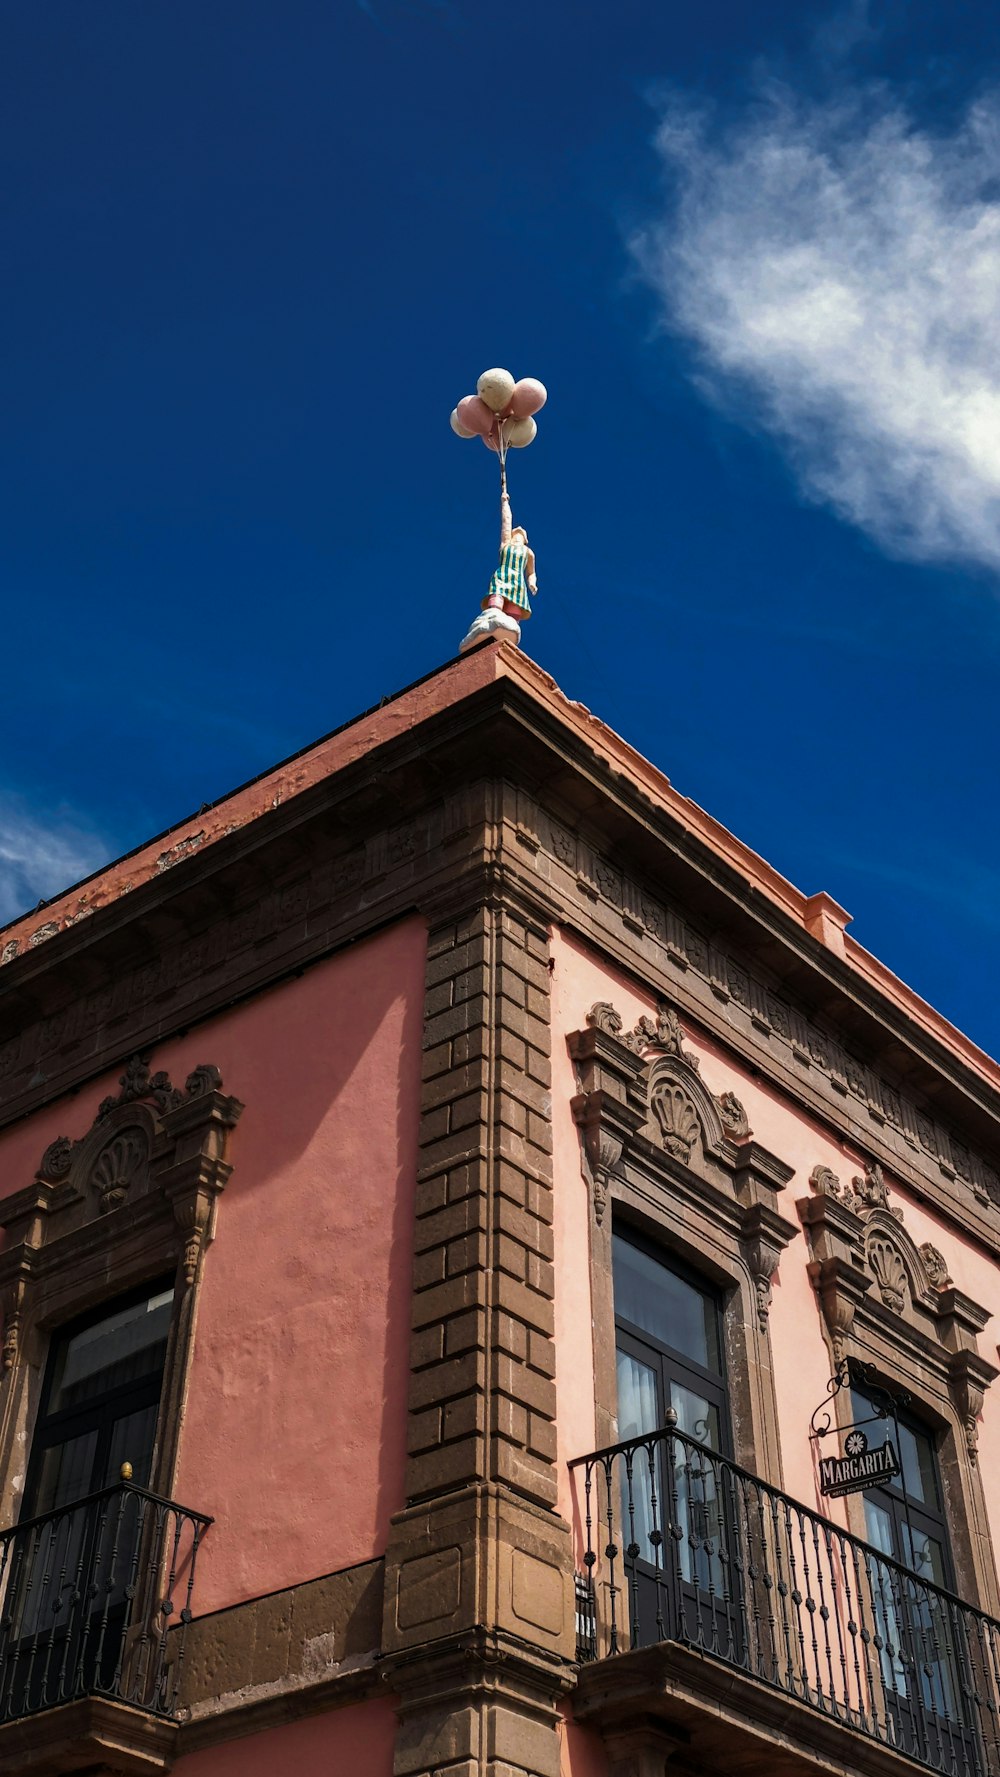 a building with a balcony and a weather vane on top